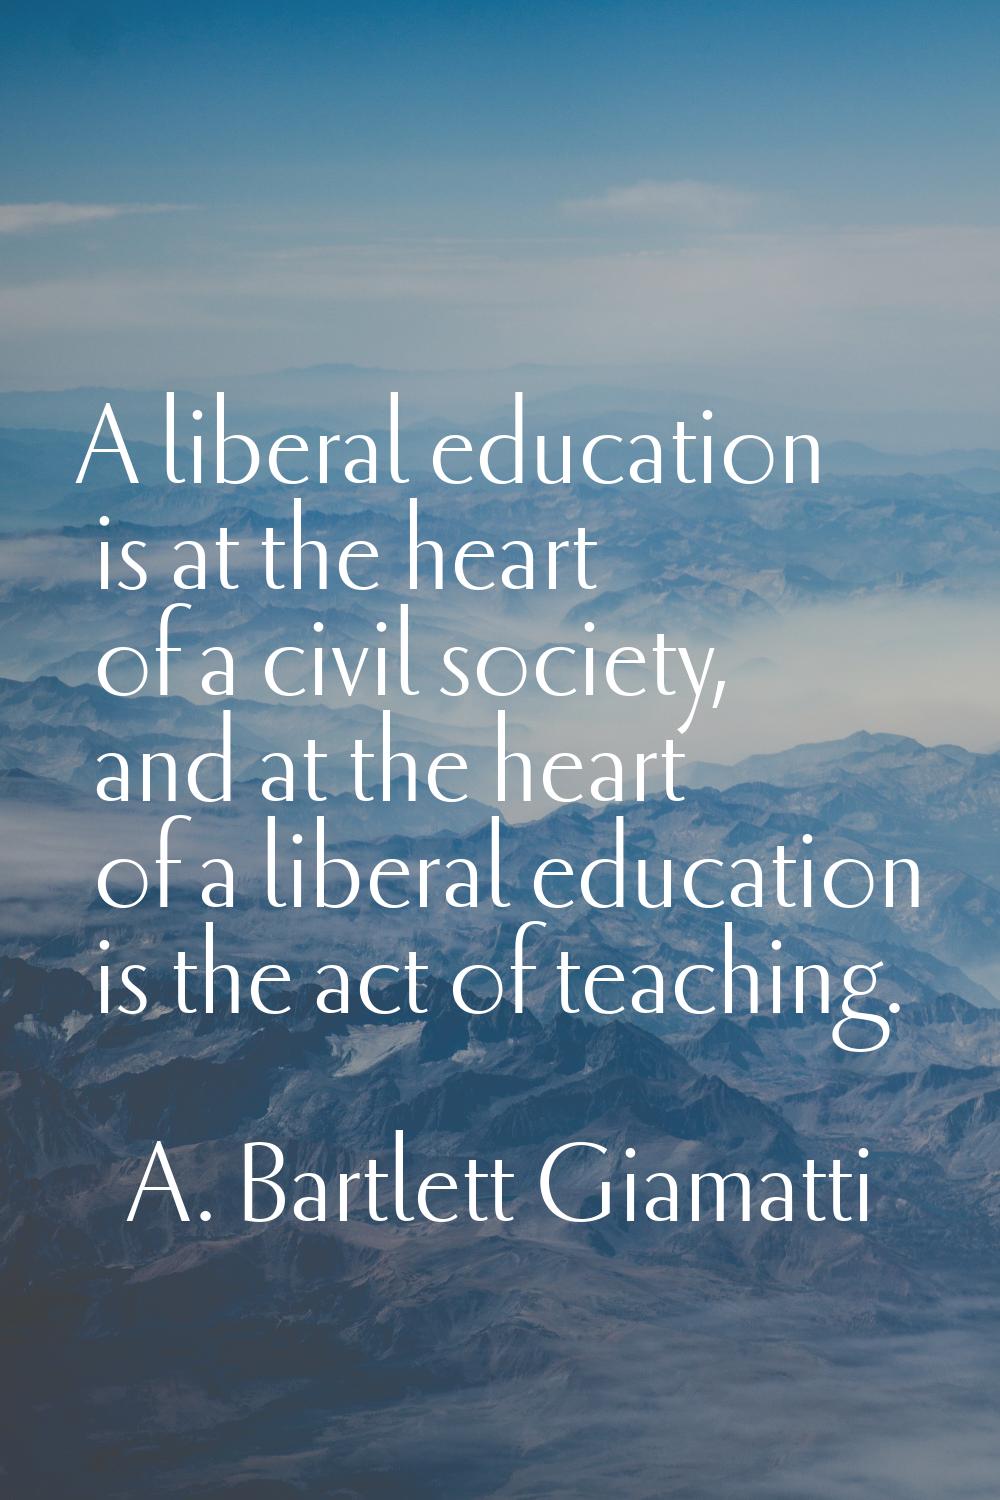 A liberal education is at the heart of a civil society, and at the heart of a liberal education is 